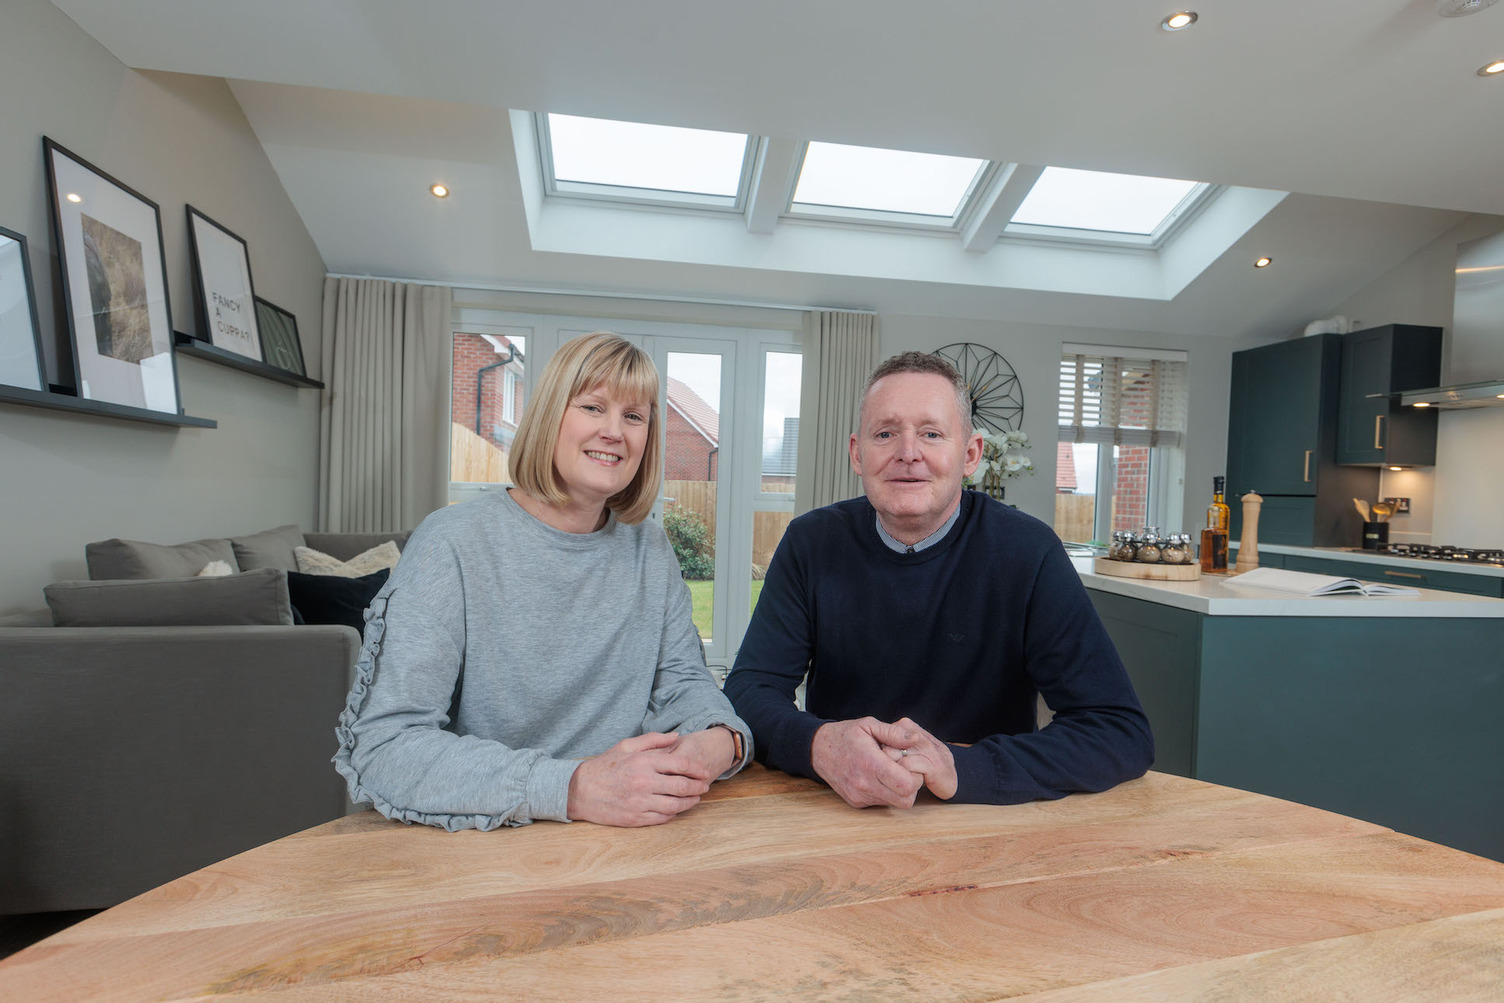 Why we bought our home in Yorkshire